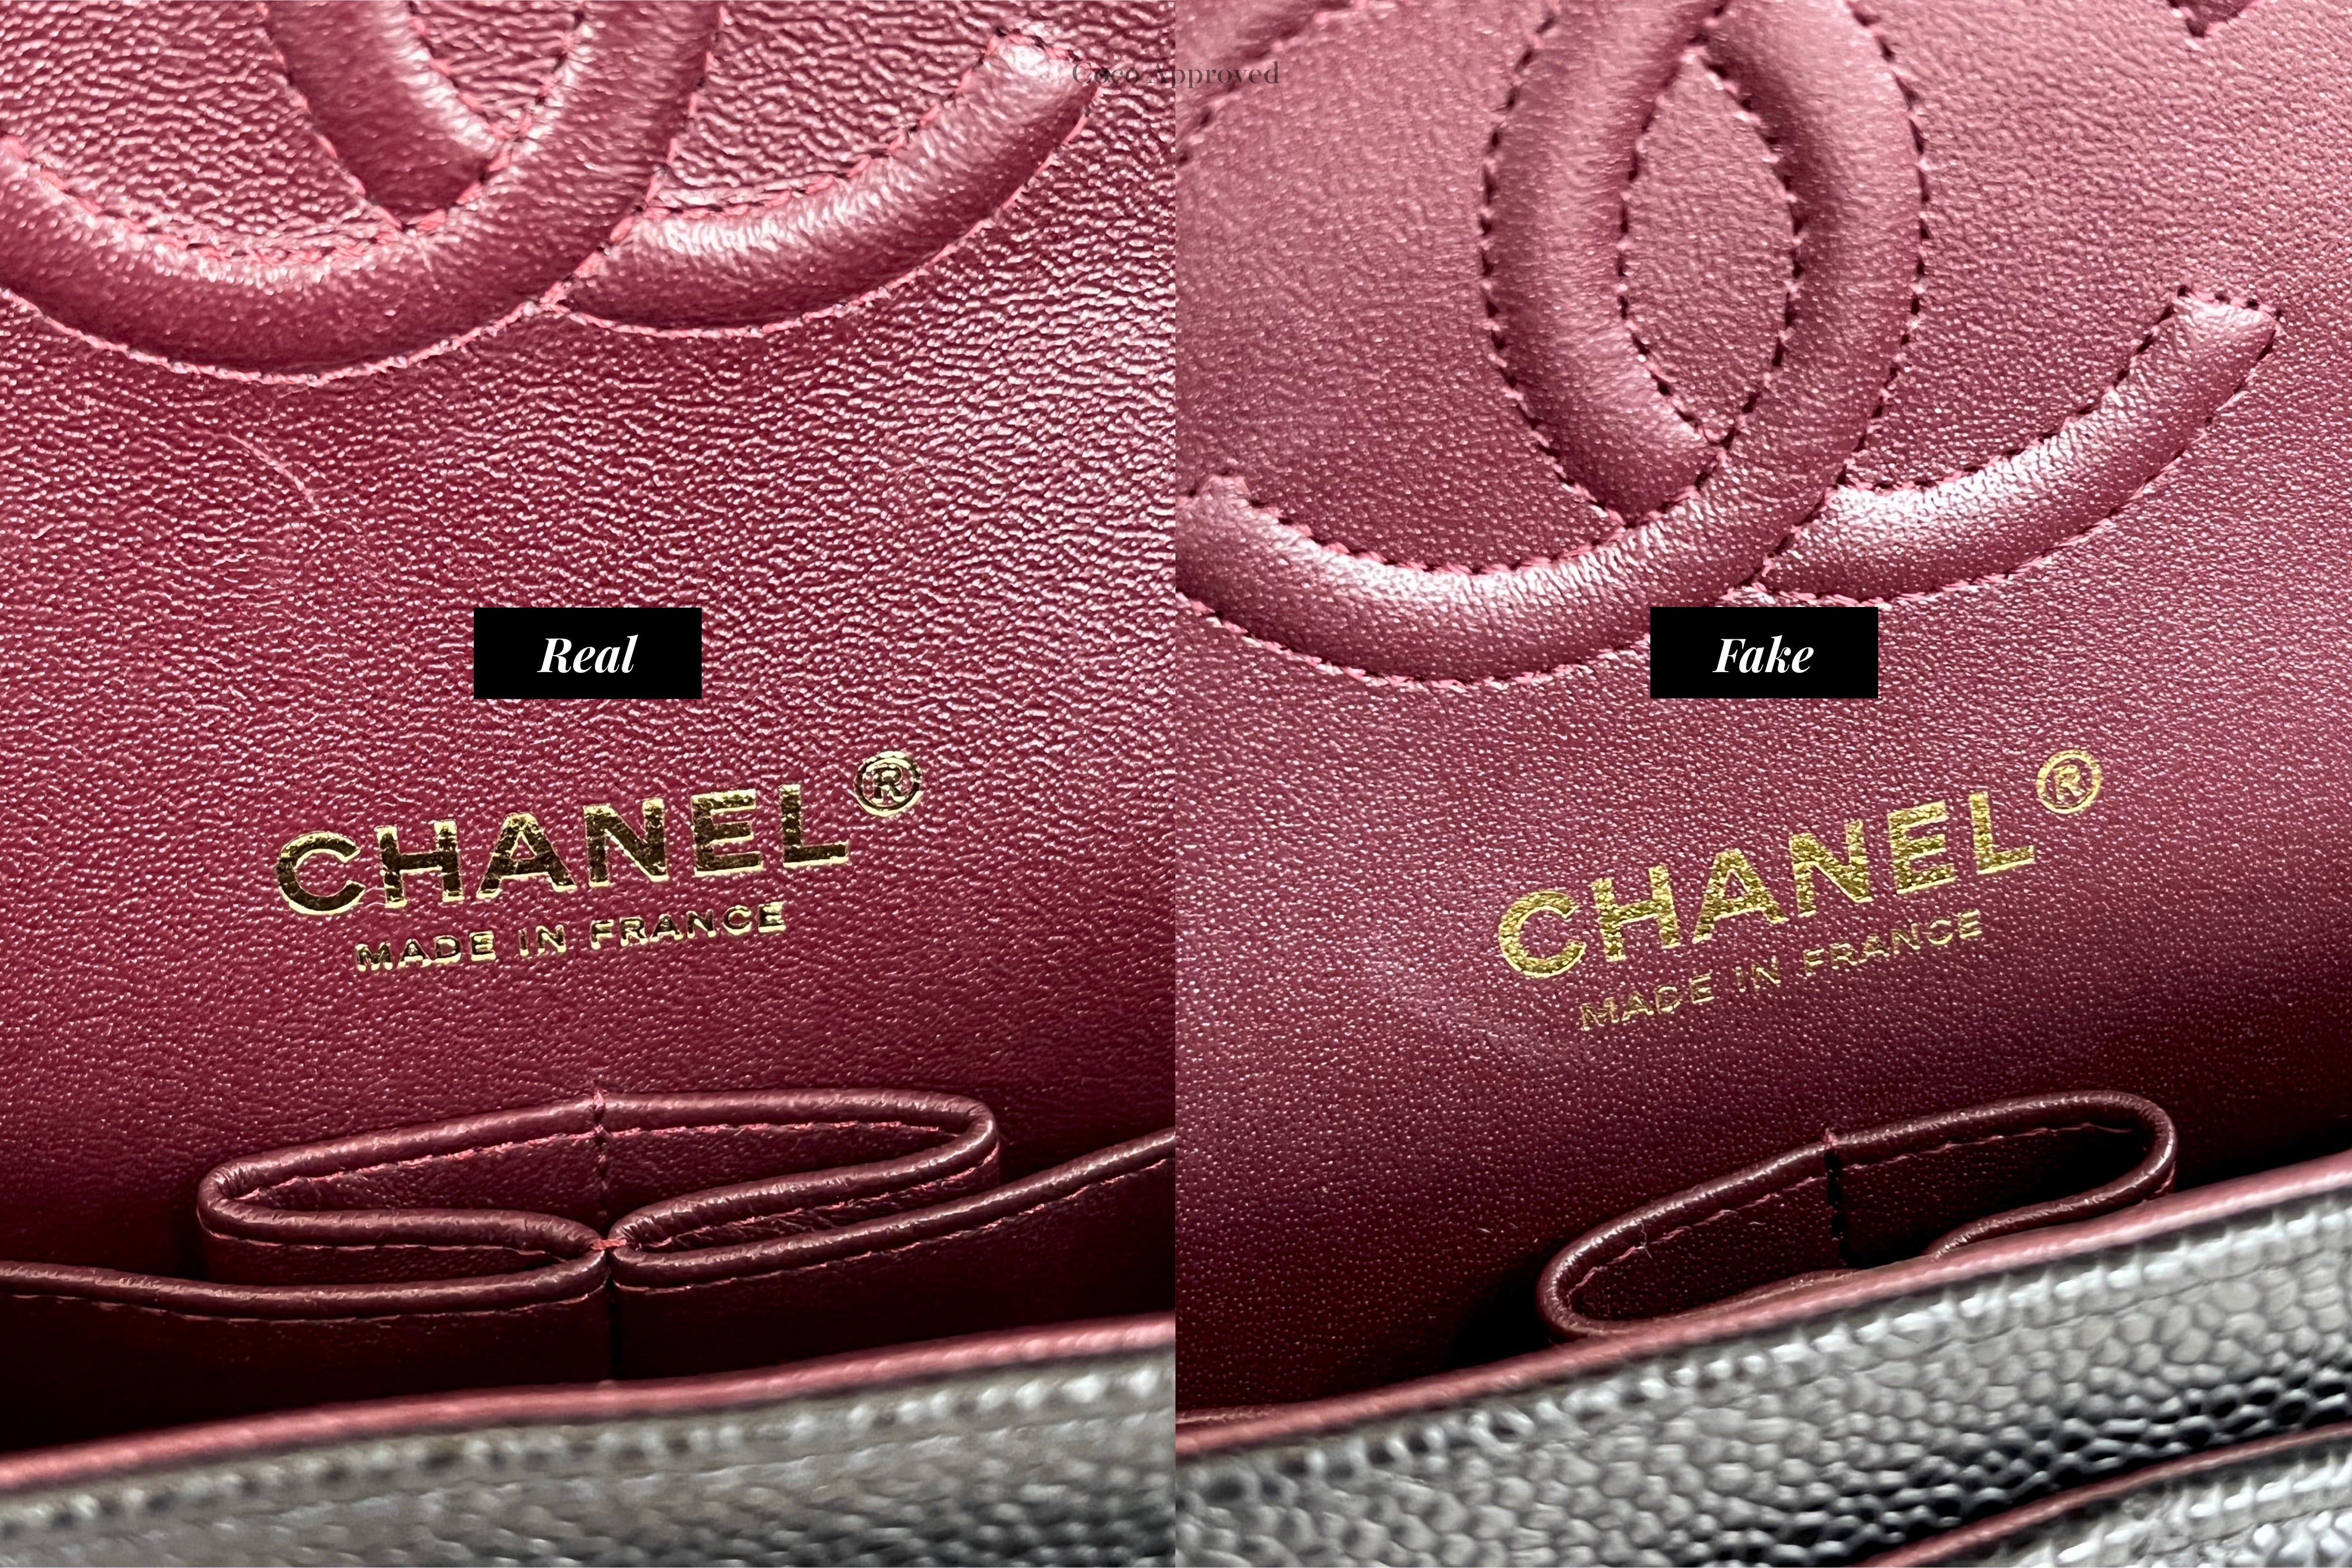 Chanel Real VS Fake Bag: How To Spot The Difference? I